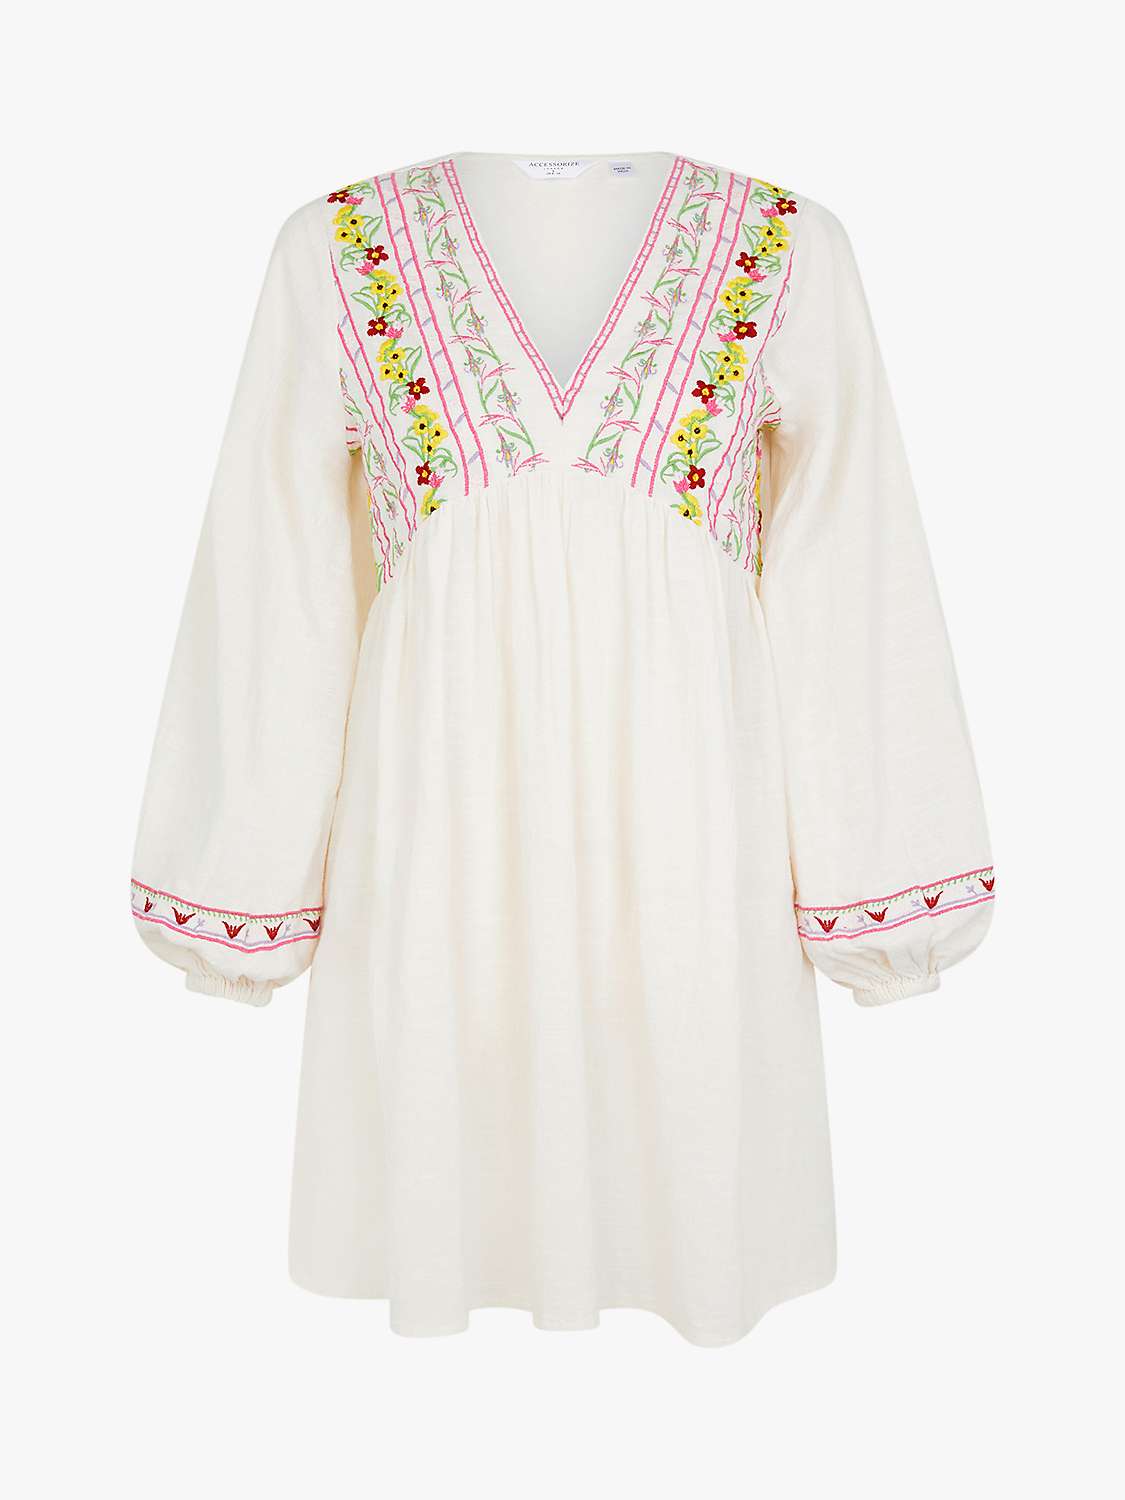 Buy Accessorize Floral Embroidered Mini Dress, White Online at johnlewis.com